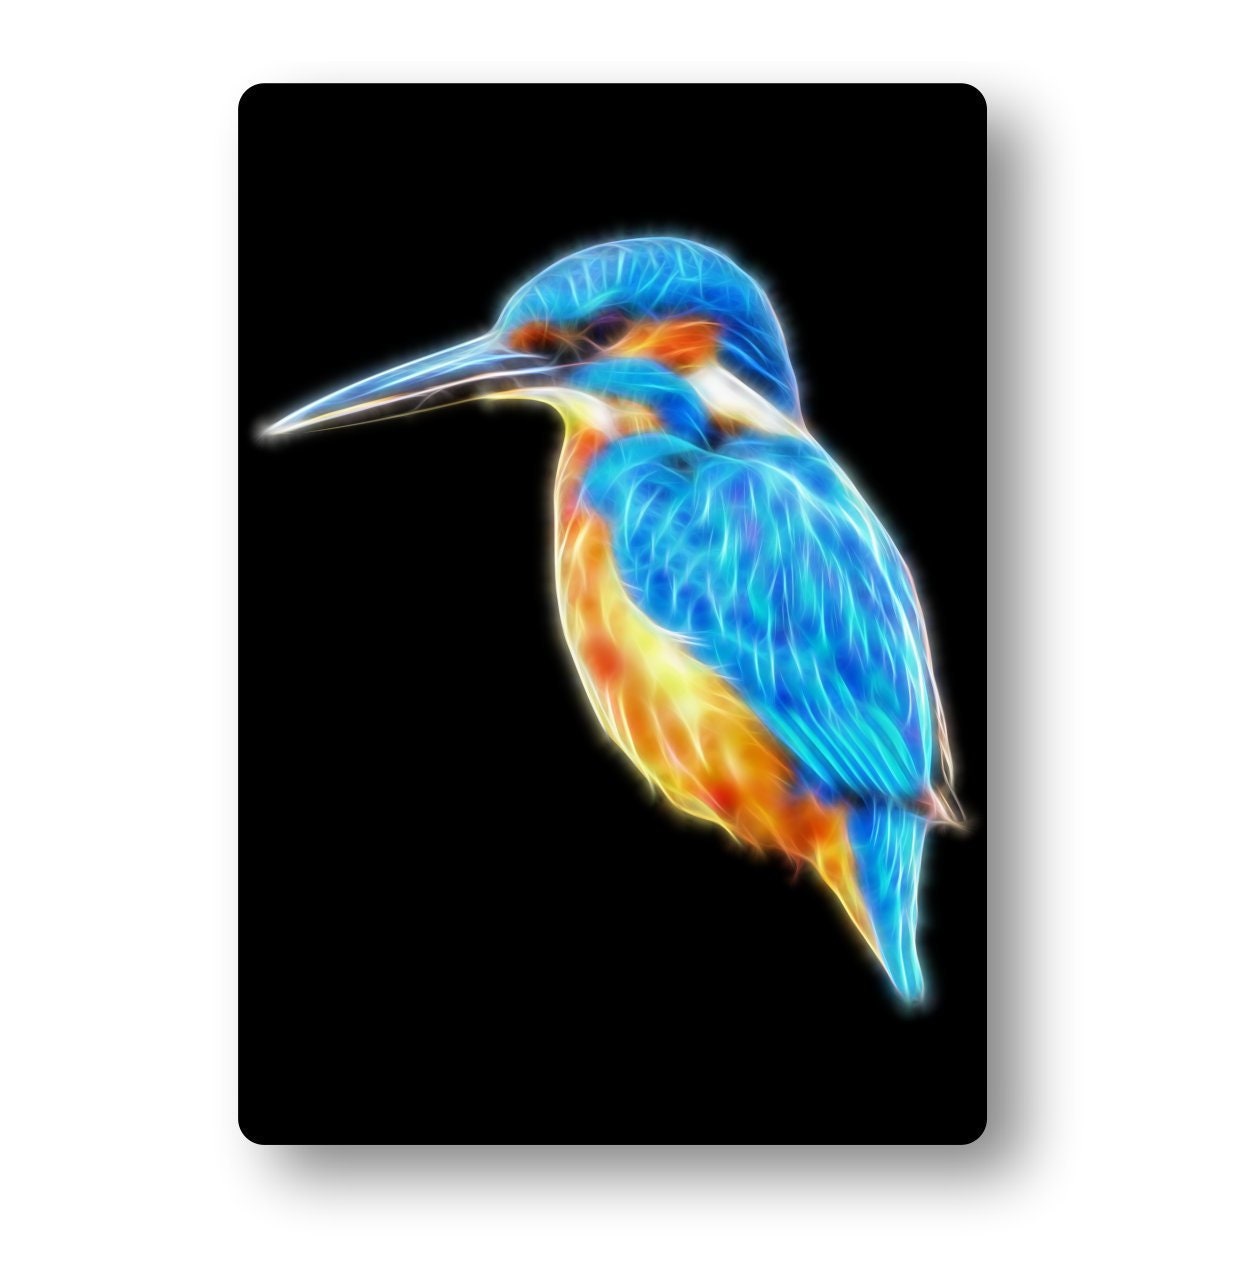 Kingfisher Aluminium Metal Wall Plaque. Also available as Mouse Pad, Keychain or Coaster.